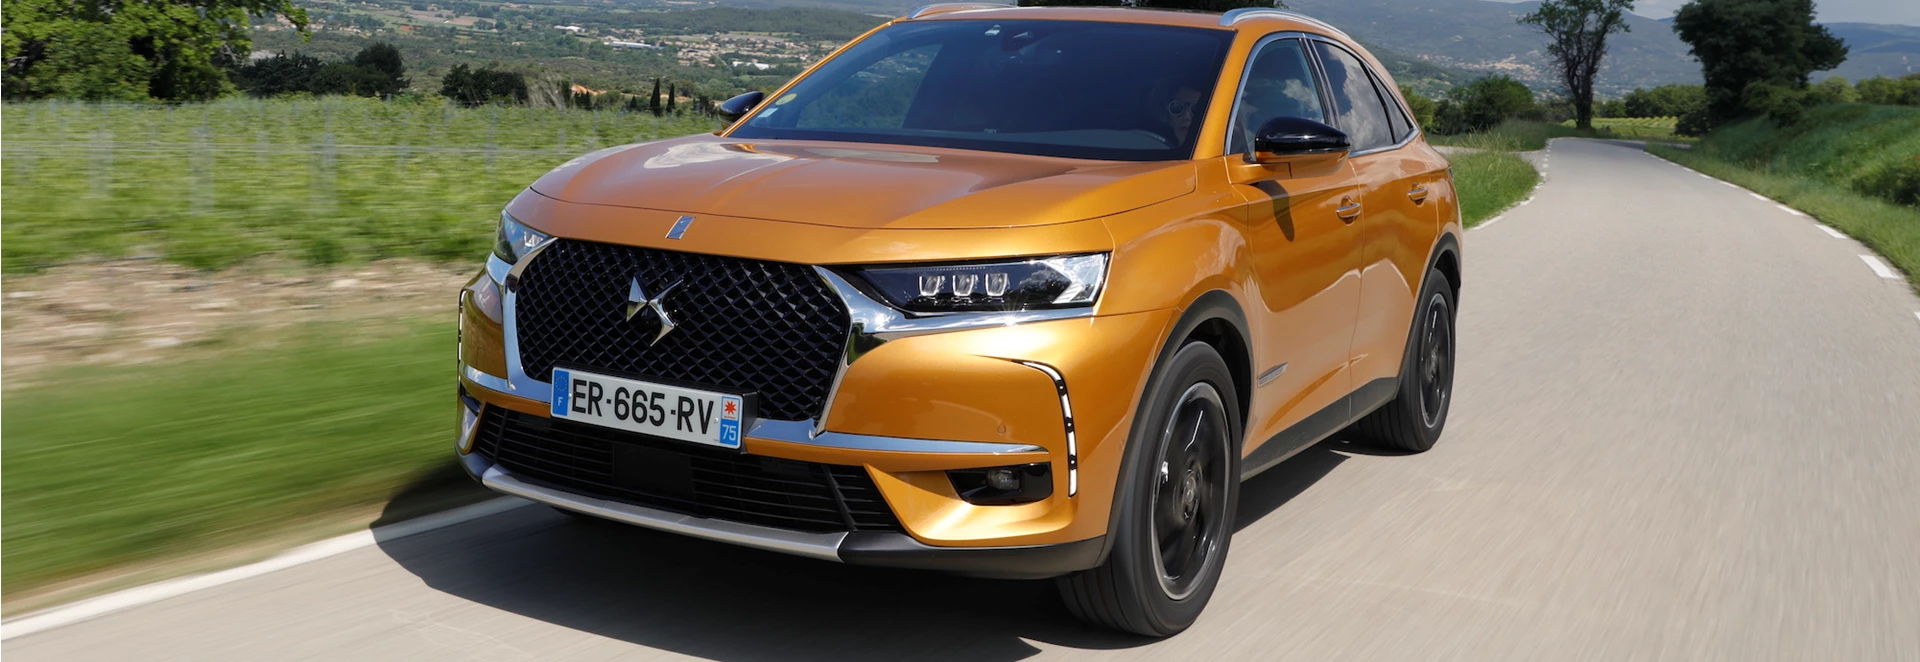 DS 7 Crossback gains new petrol engine